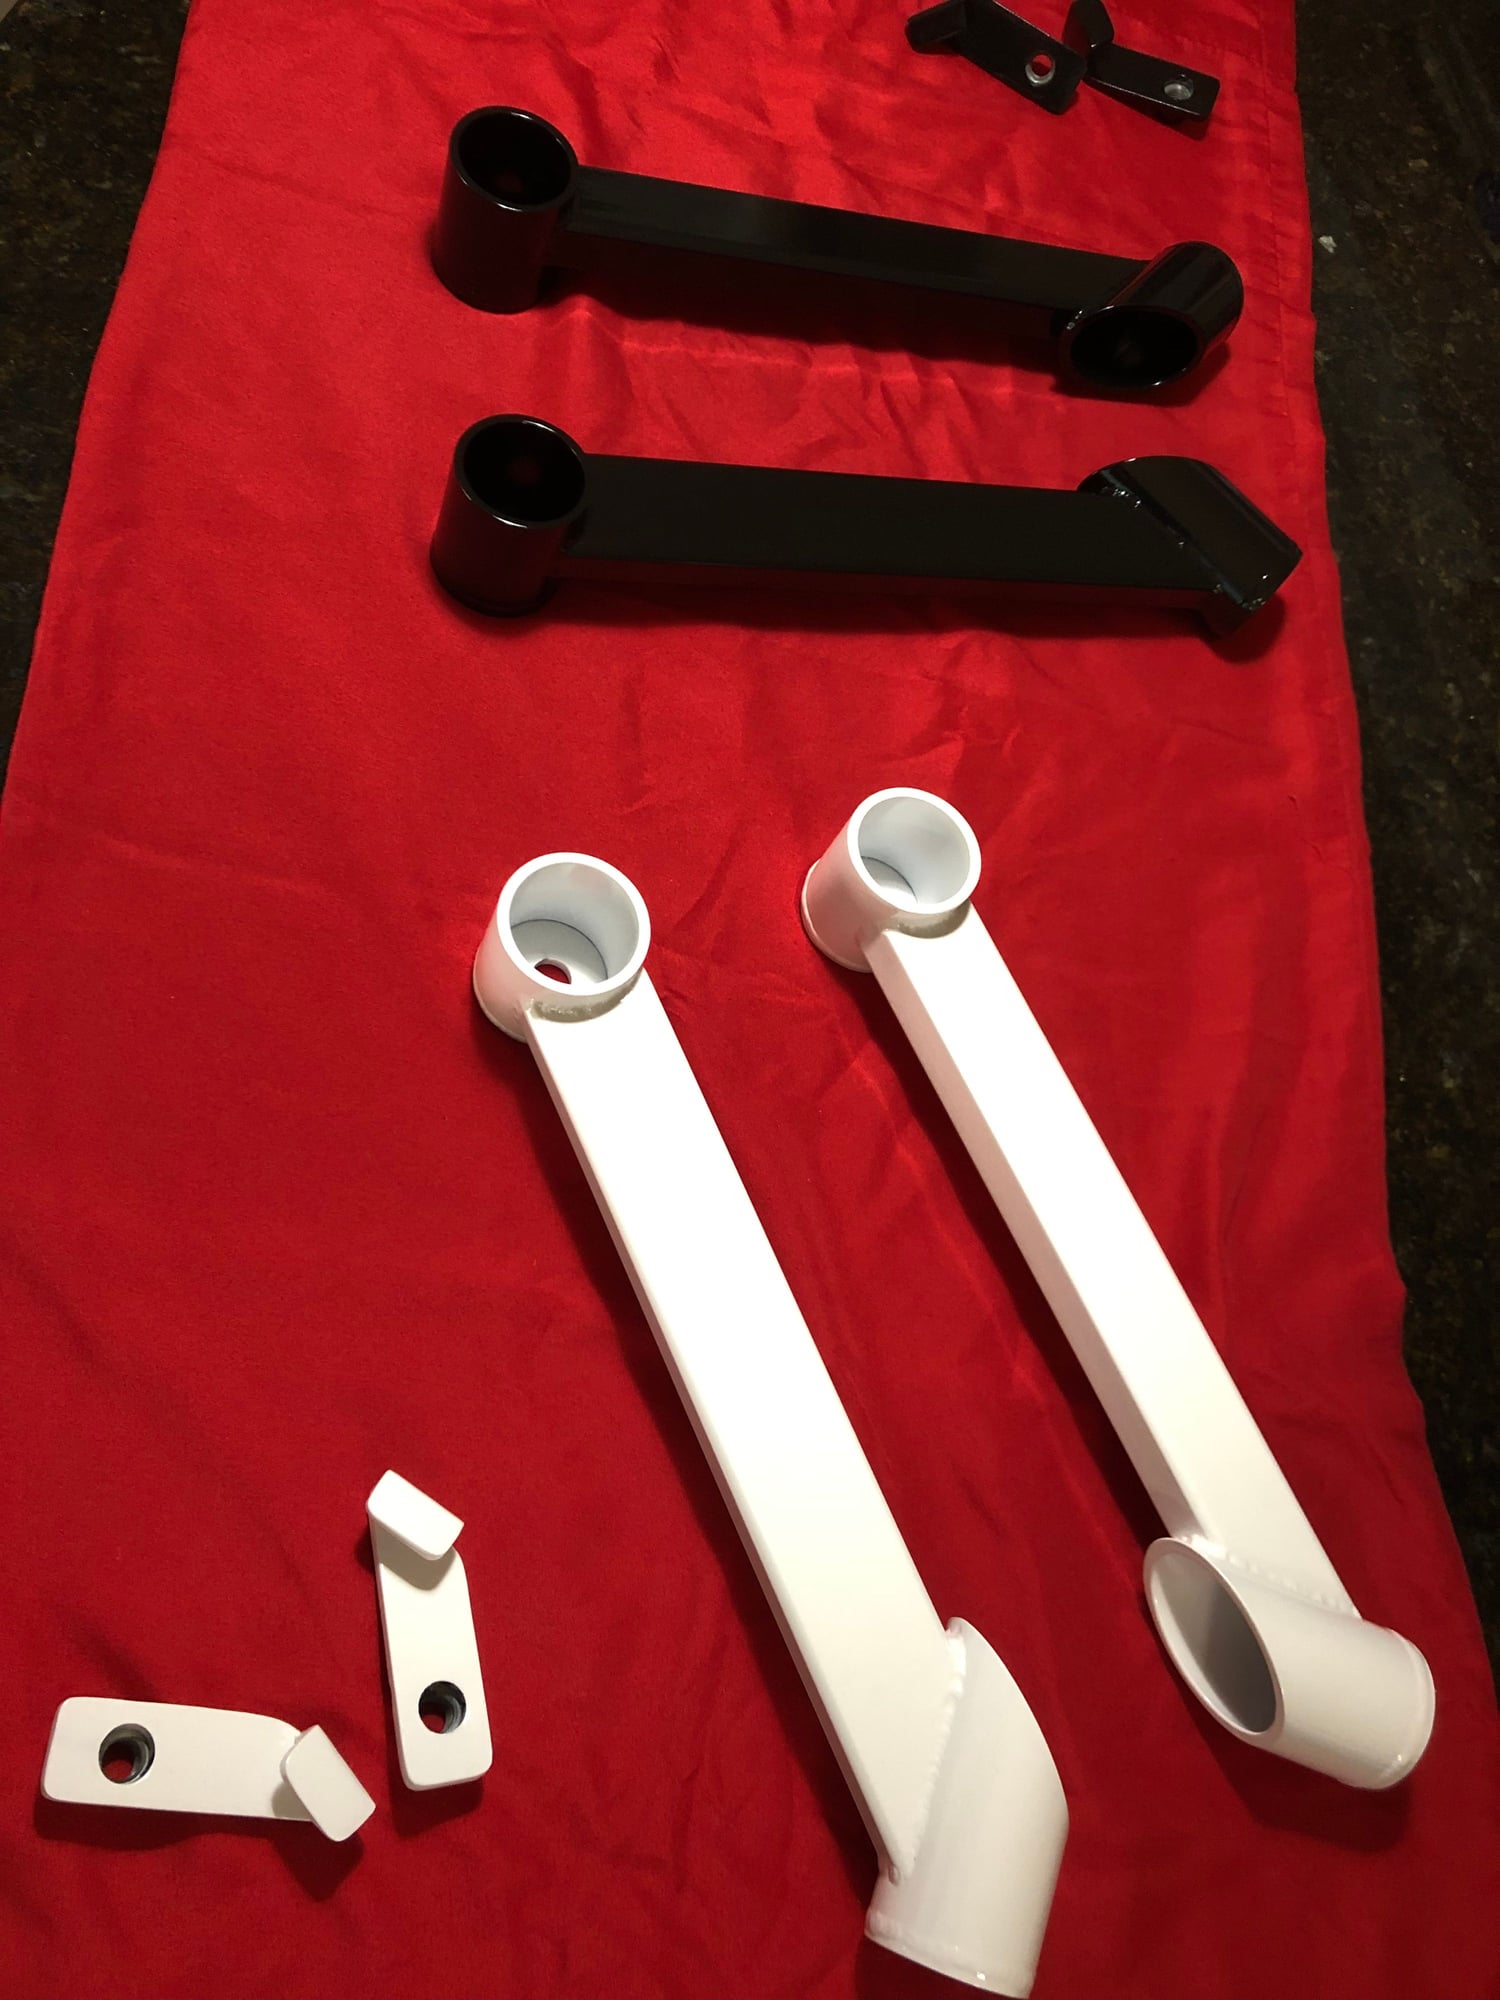 Steering/Suspension - Evo 8/9 chassis braces - New - Tampa, FL 33615, United States